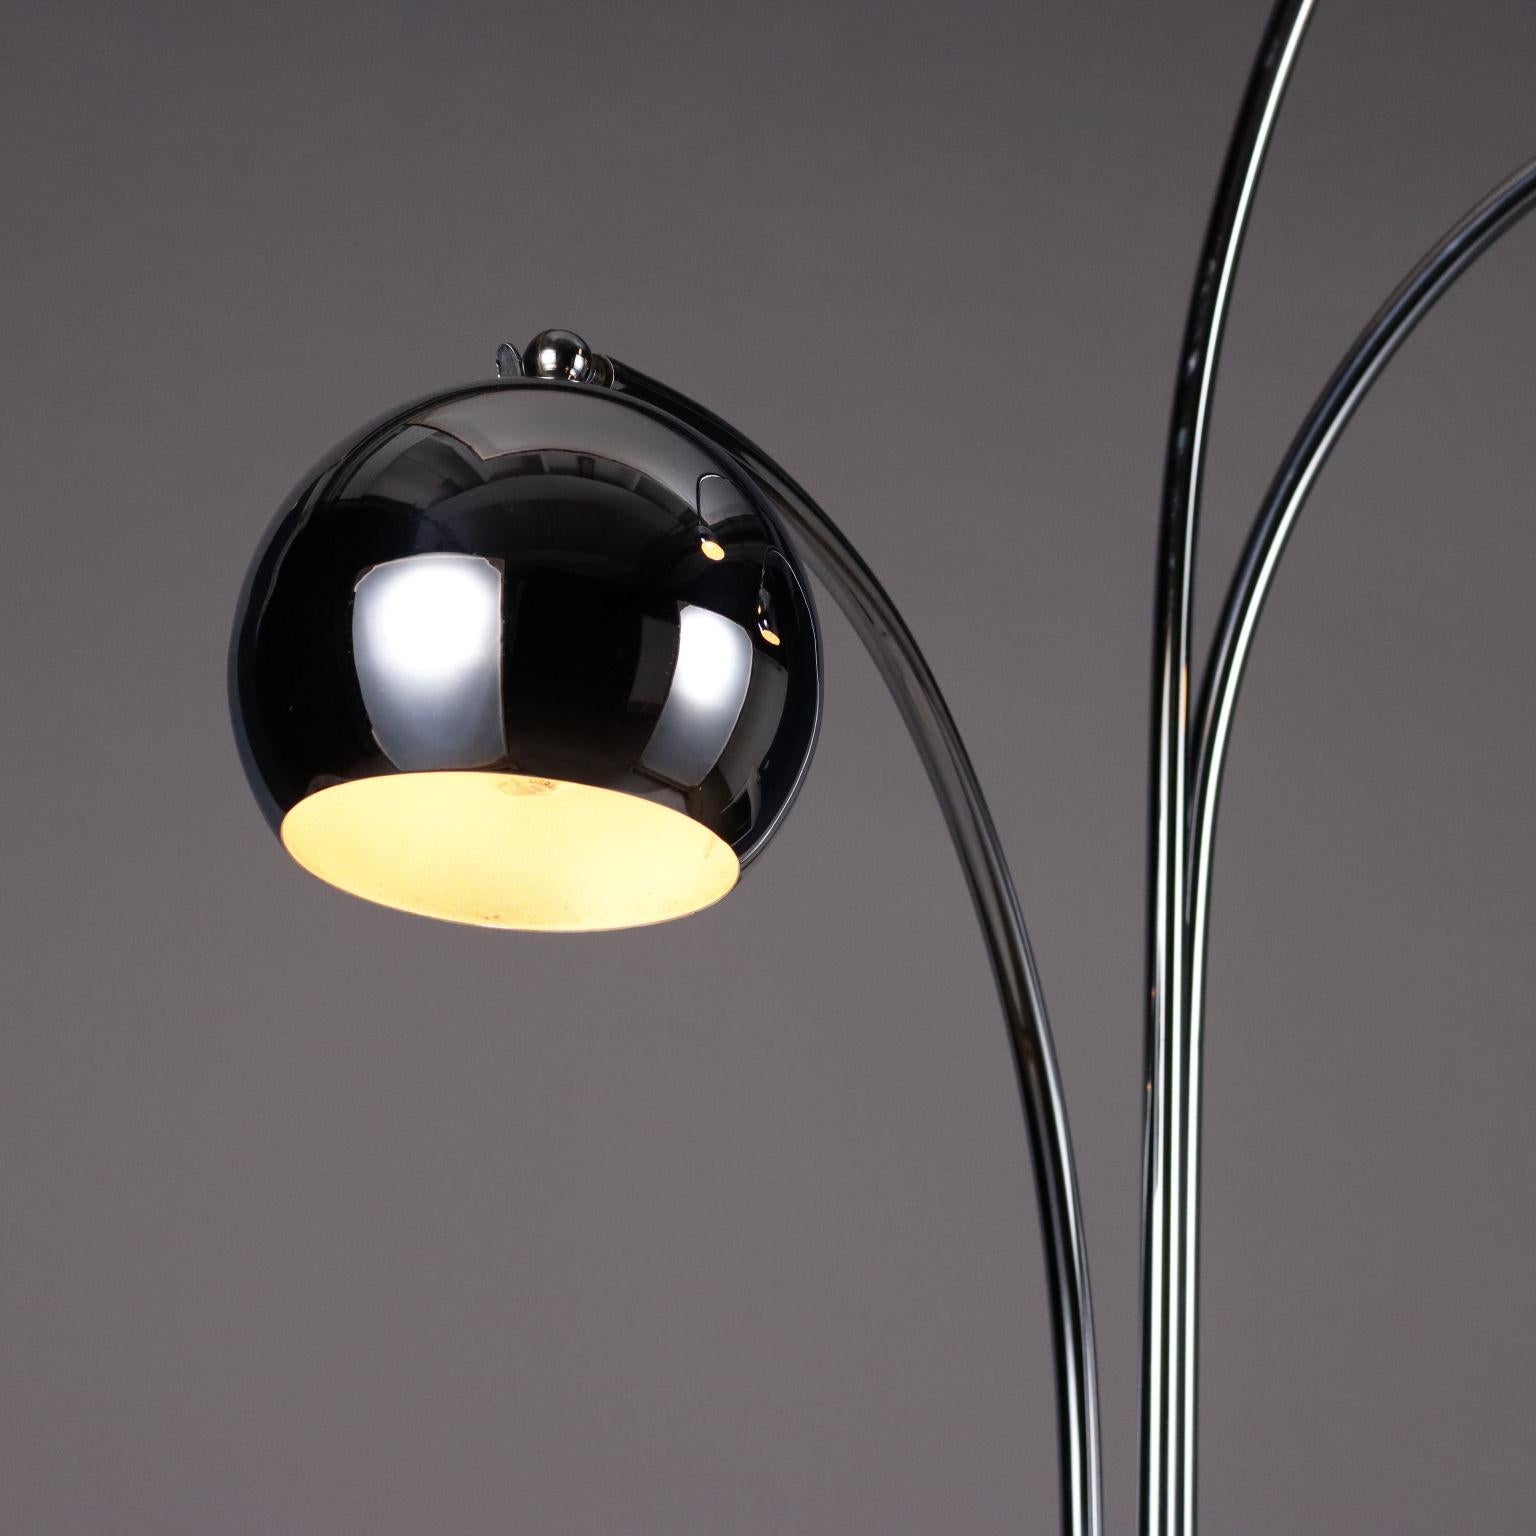 Floor lamp Years 60-70 In Good Condition For Sale In Milano, IT